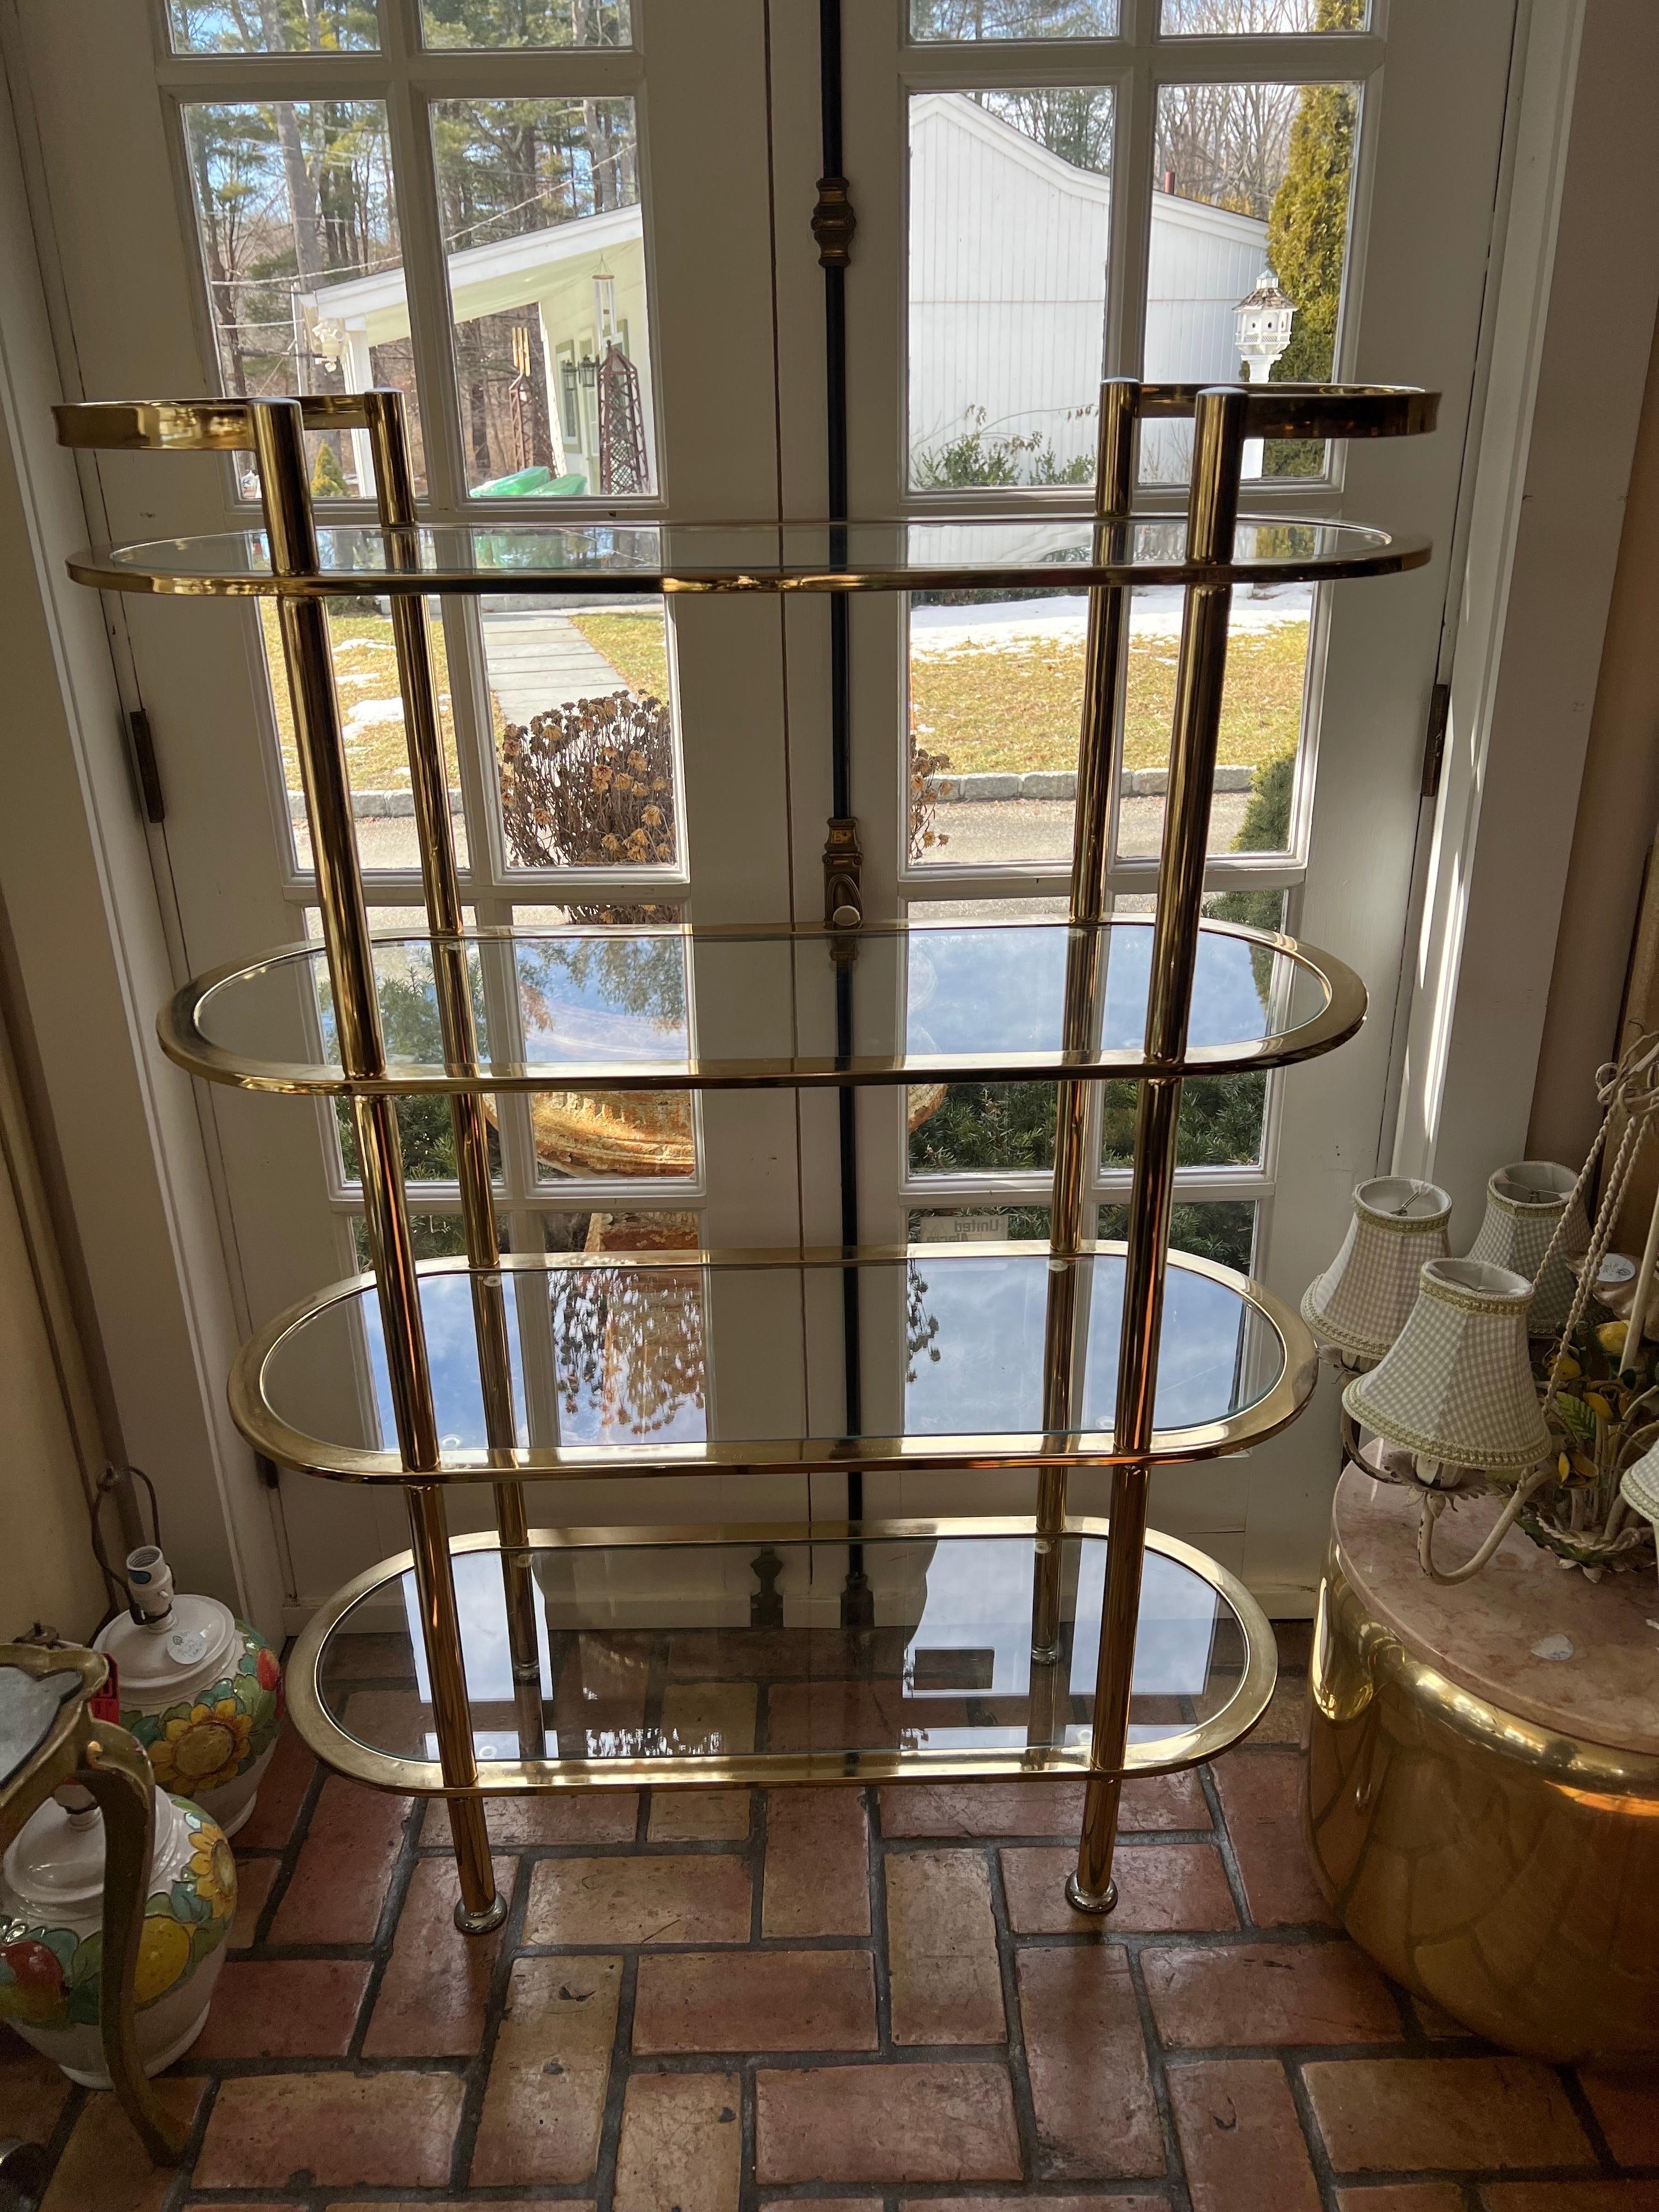 Hollywood Regency tall tiered bar cart / Etagere. A stunning brass and glass four tiered bar cart that could also function as a mid size etagere. Versatile, stylish and a beautiful addition to any home. Could also be used in a dressing closet for